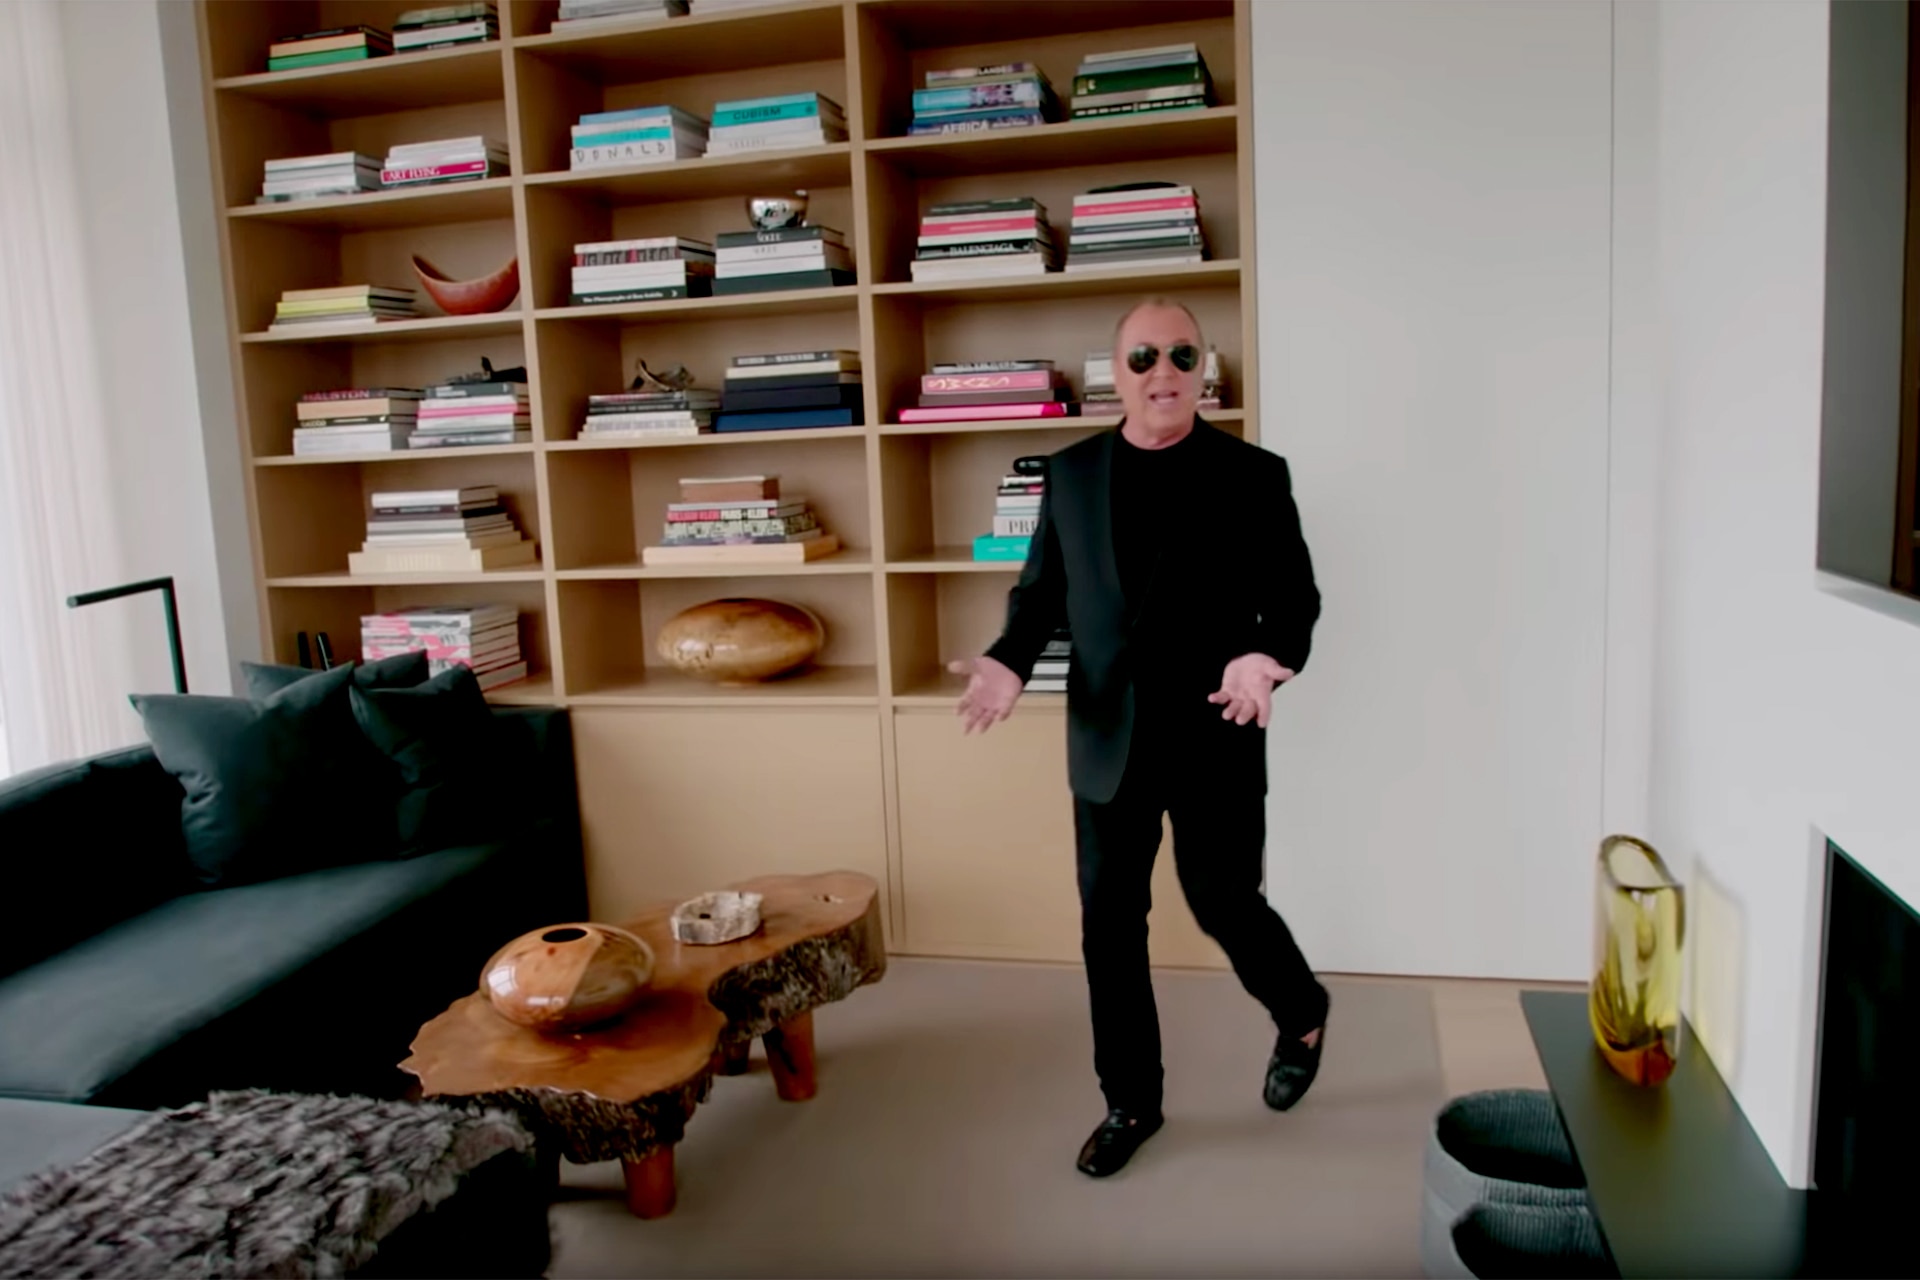 Take A Tour Of Michael Kors' Fully Customised Penthouse Apartment